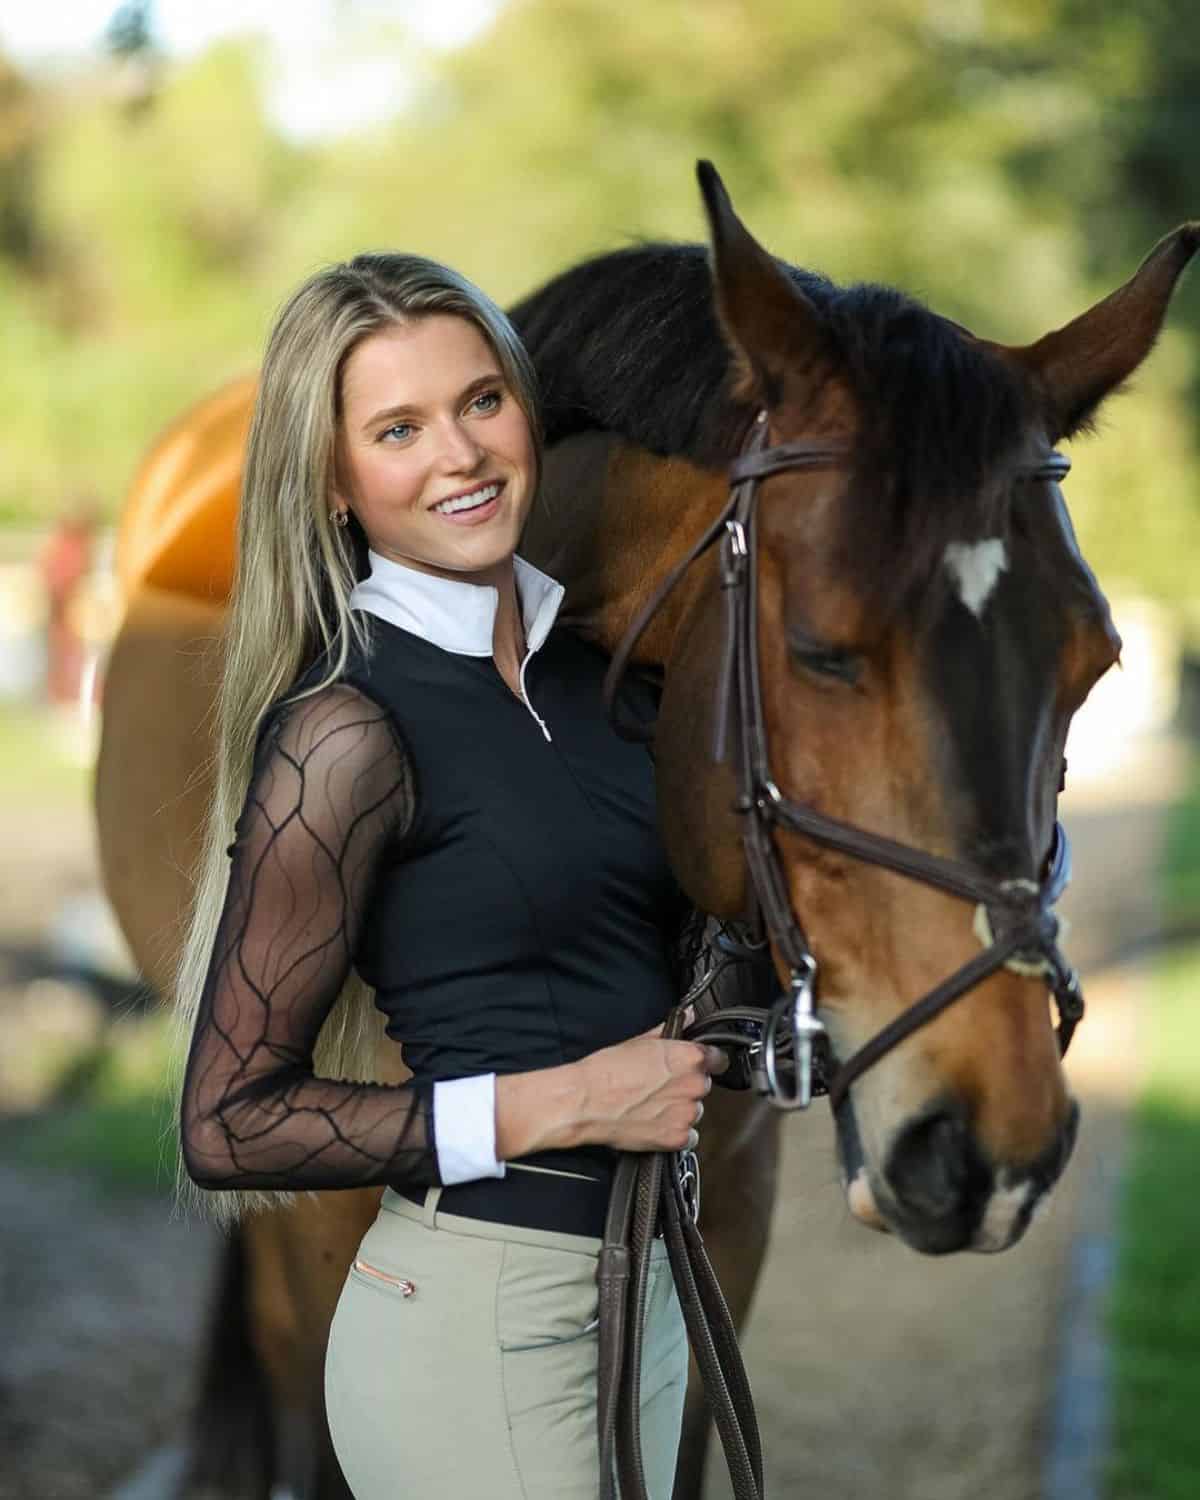 A young woman in an equestrian outfit stands near a brown horse.